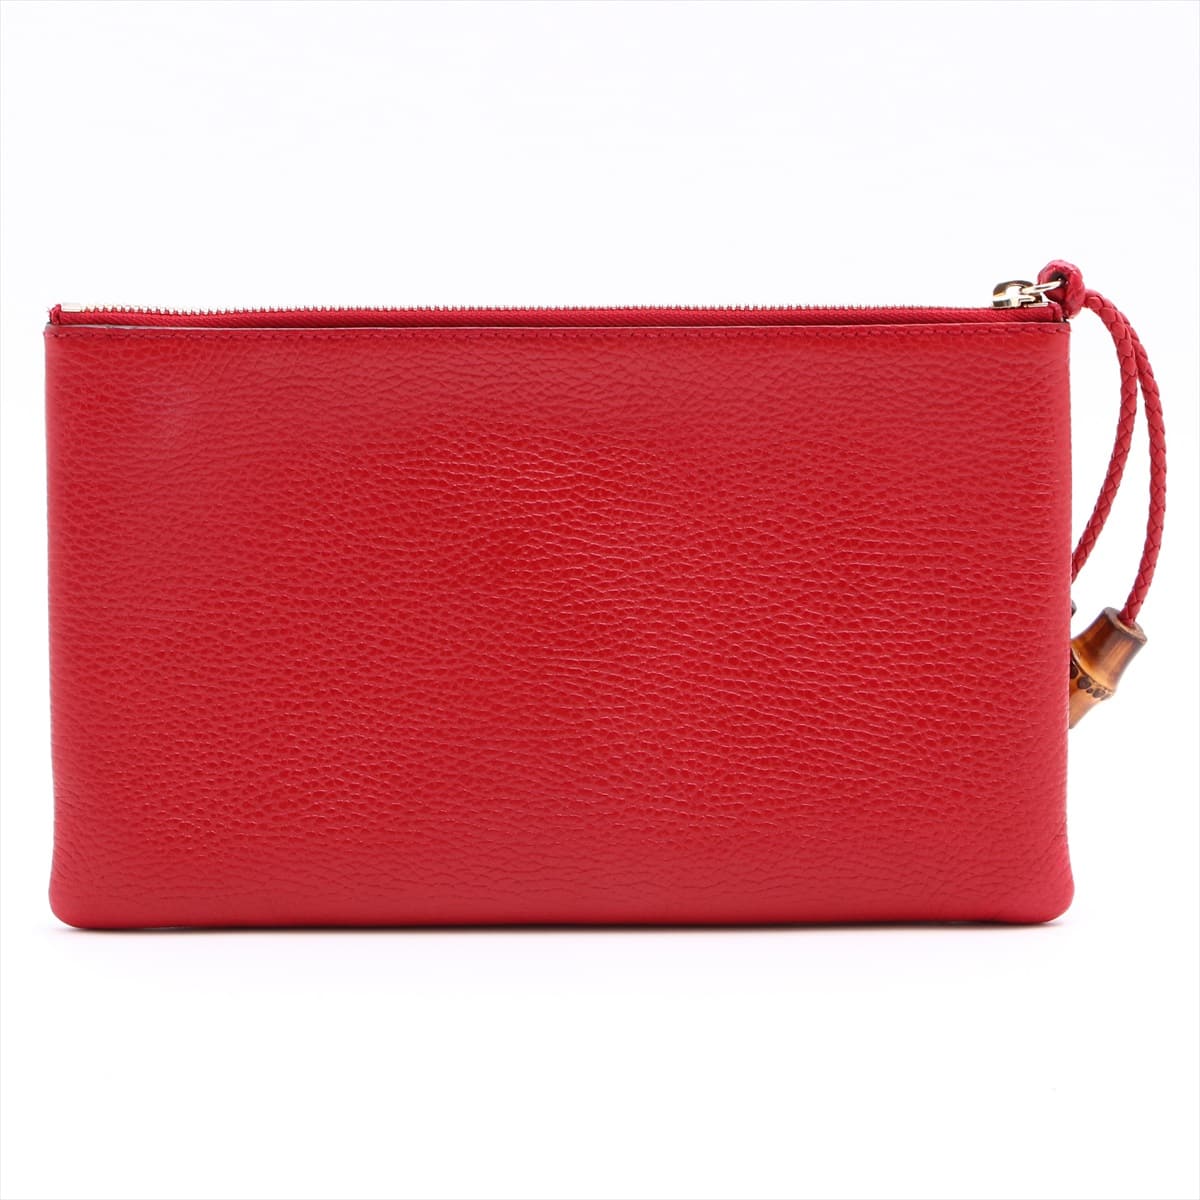 Gucci Bamboo Tassel Leather Clutch bag Red 449652